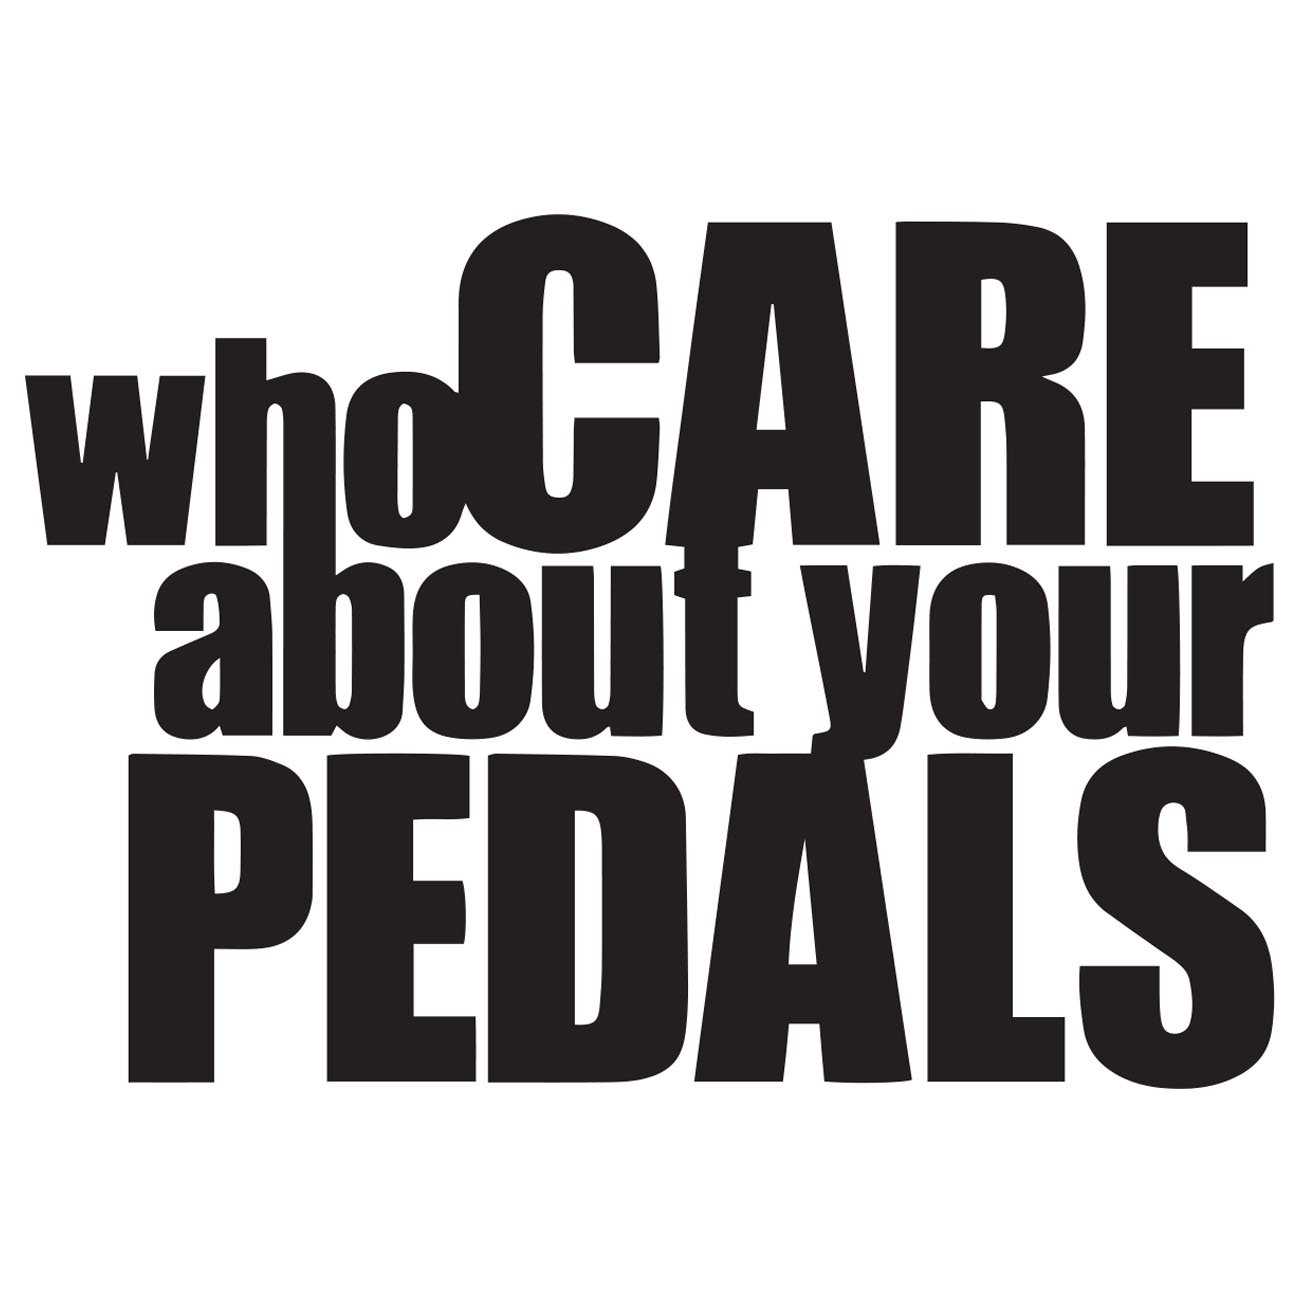 Who cares about your pedals